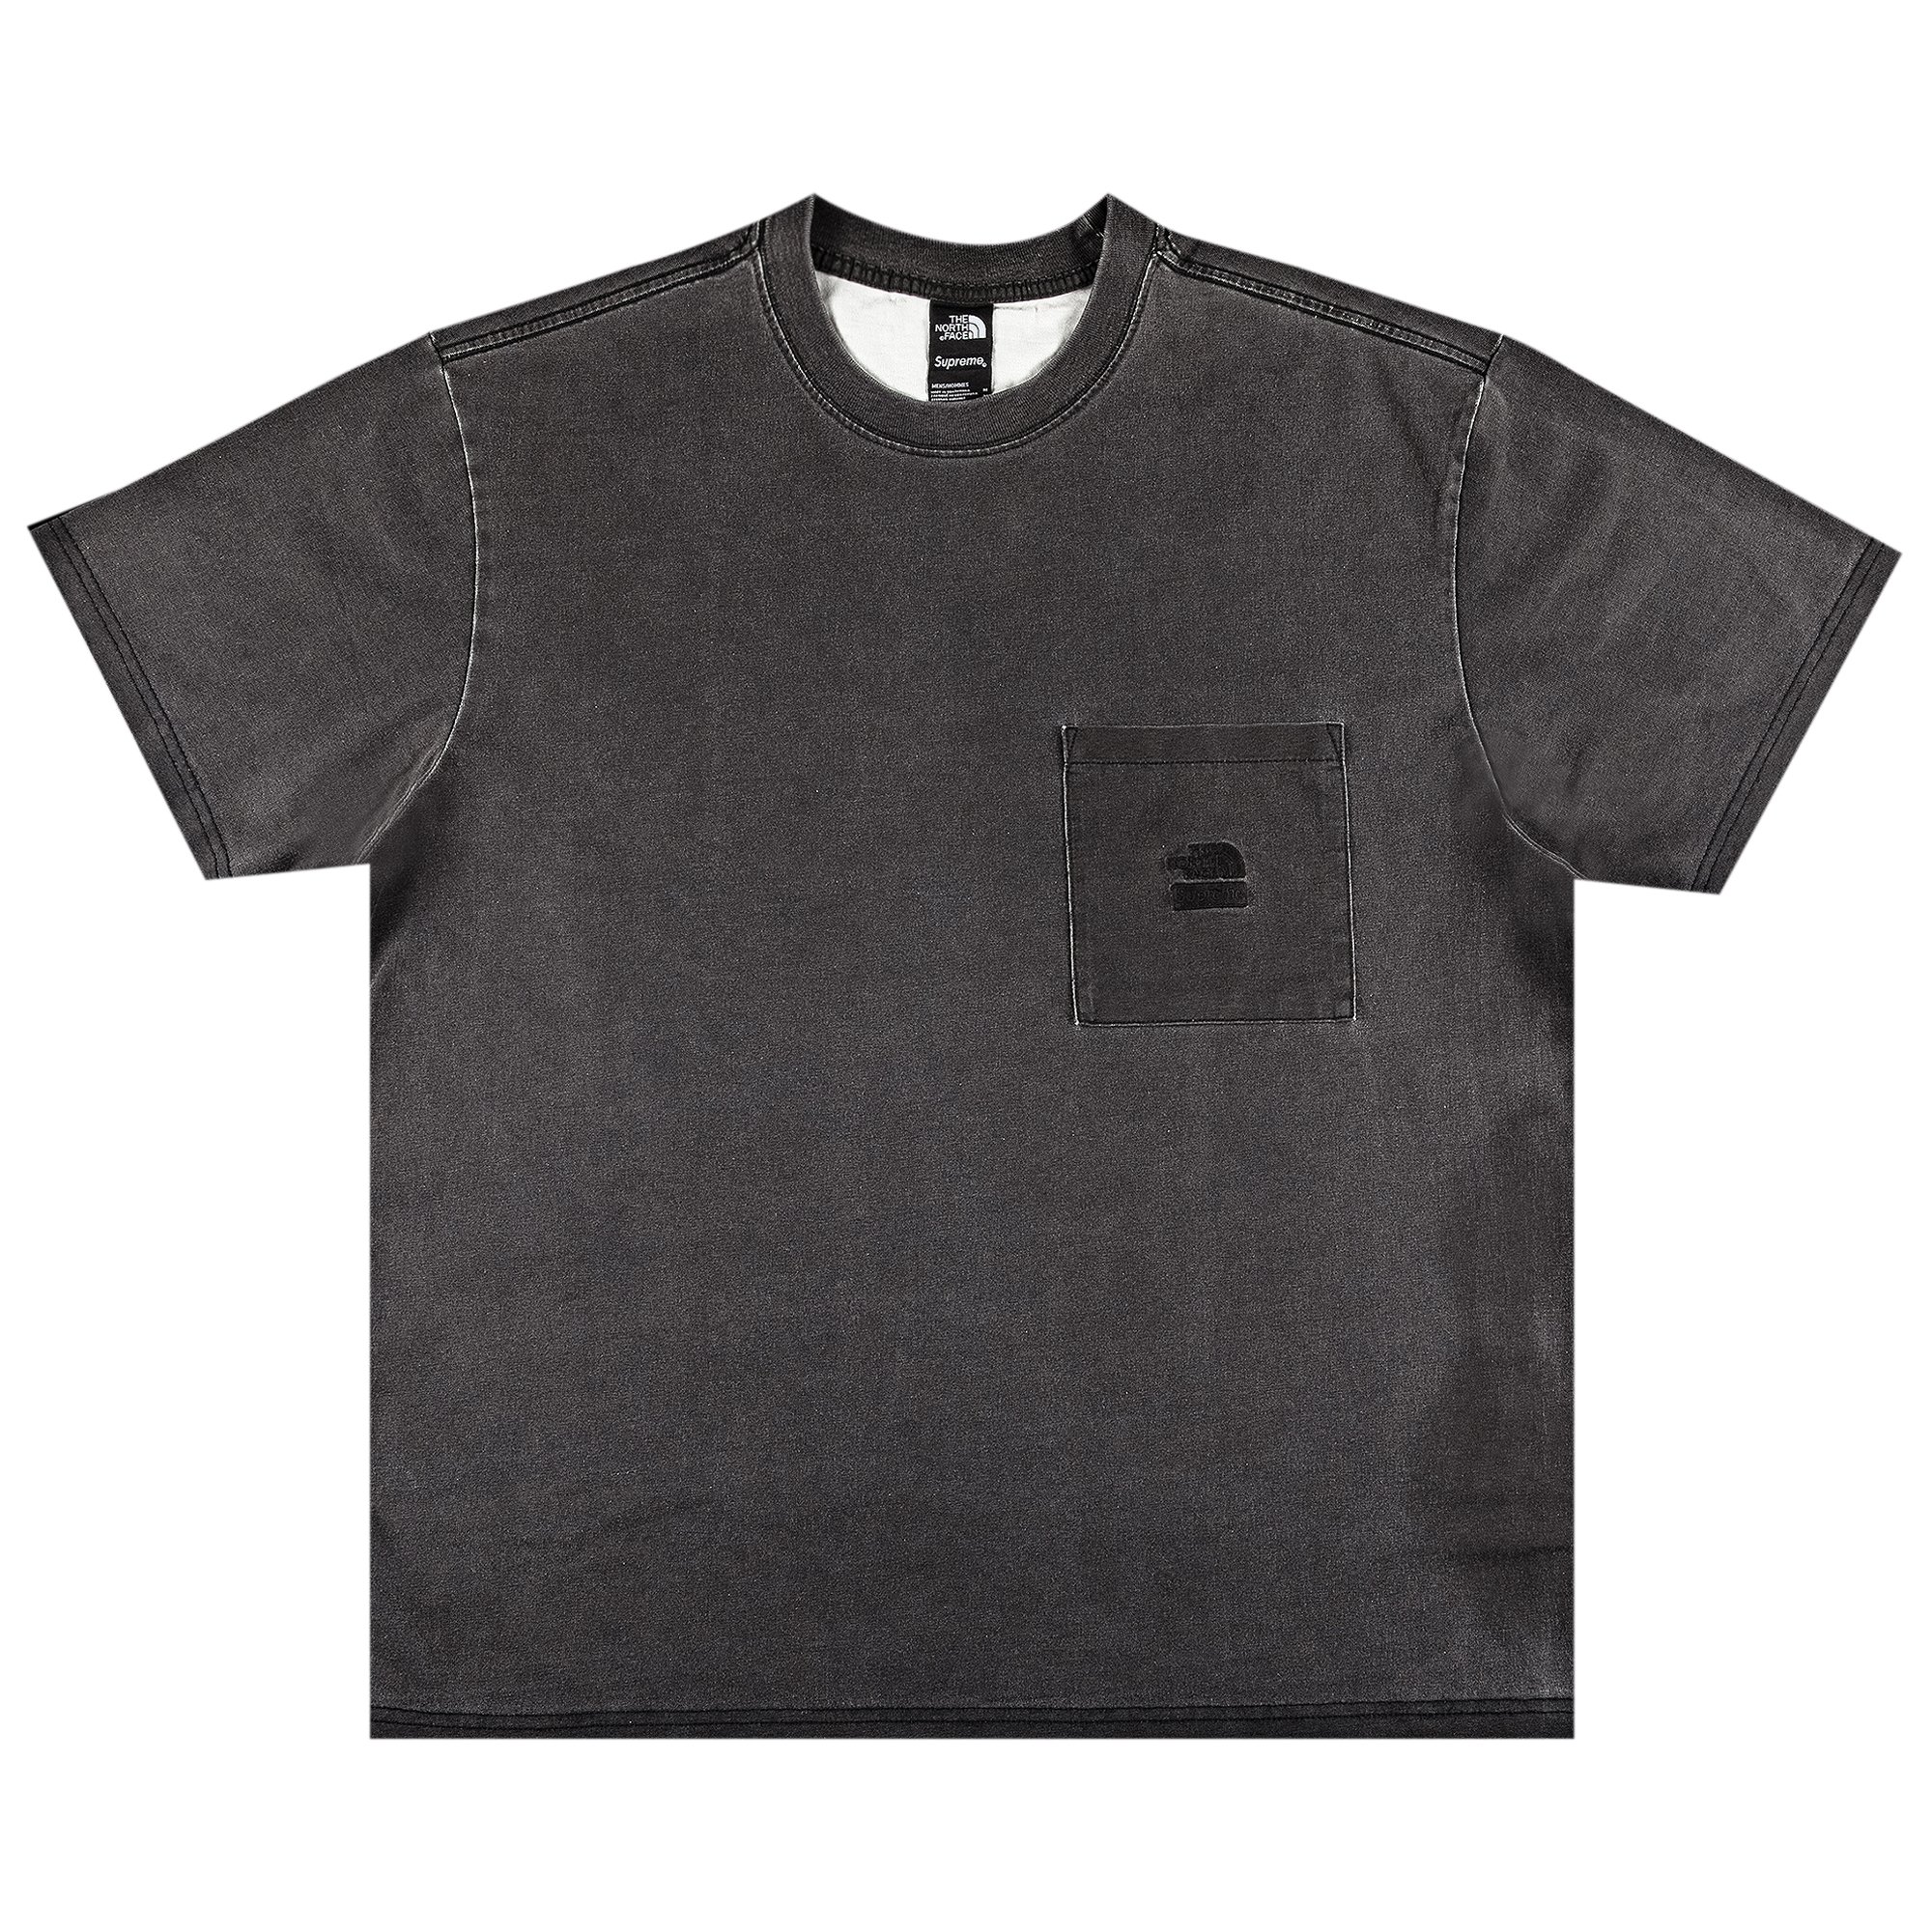 Supreme x The North Face Pigment Printed Pocket Tee 'Black' | Men's Size M